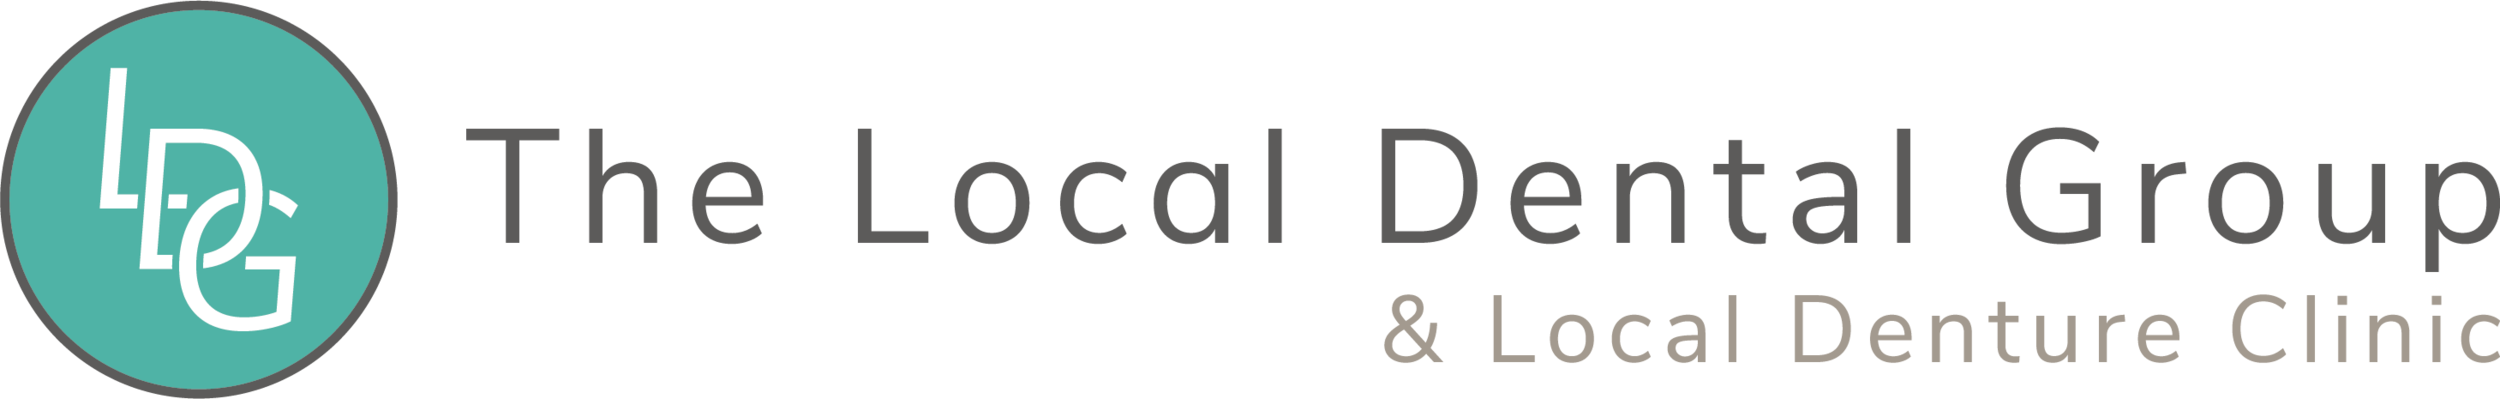 The Local Dental Group &amp; Local Denture Clinic